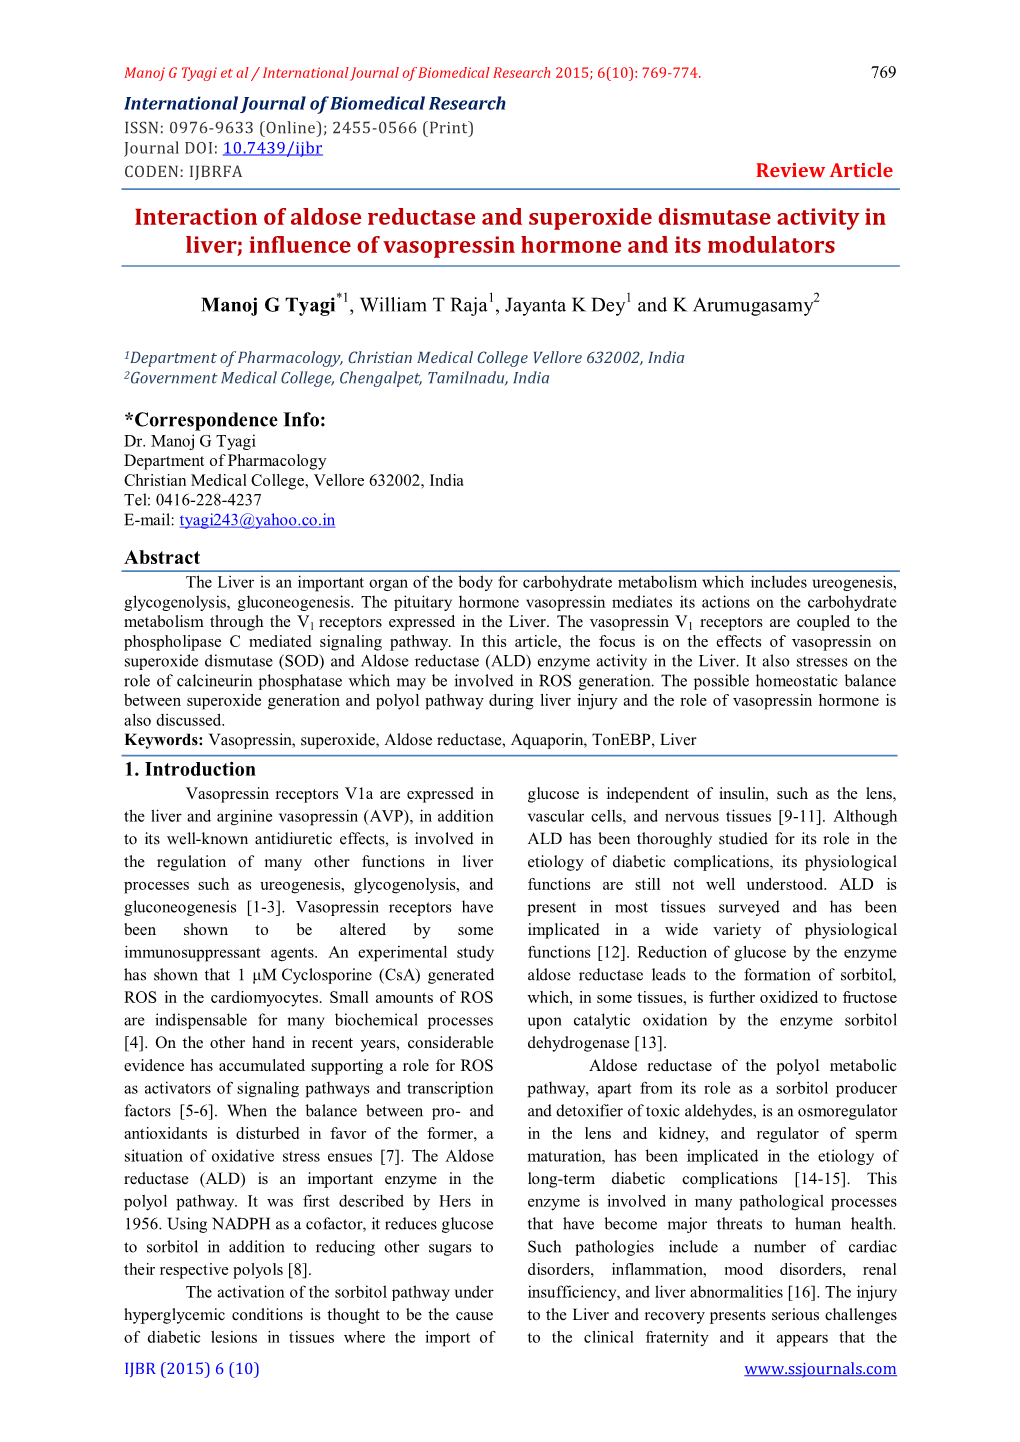 Interaction of Aldose Reductase and Superoxide Dismutase Activity in Liver; Influence of Vasopressin Hormone and Its Modulators